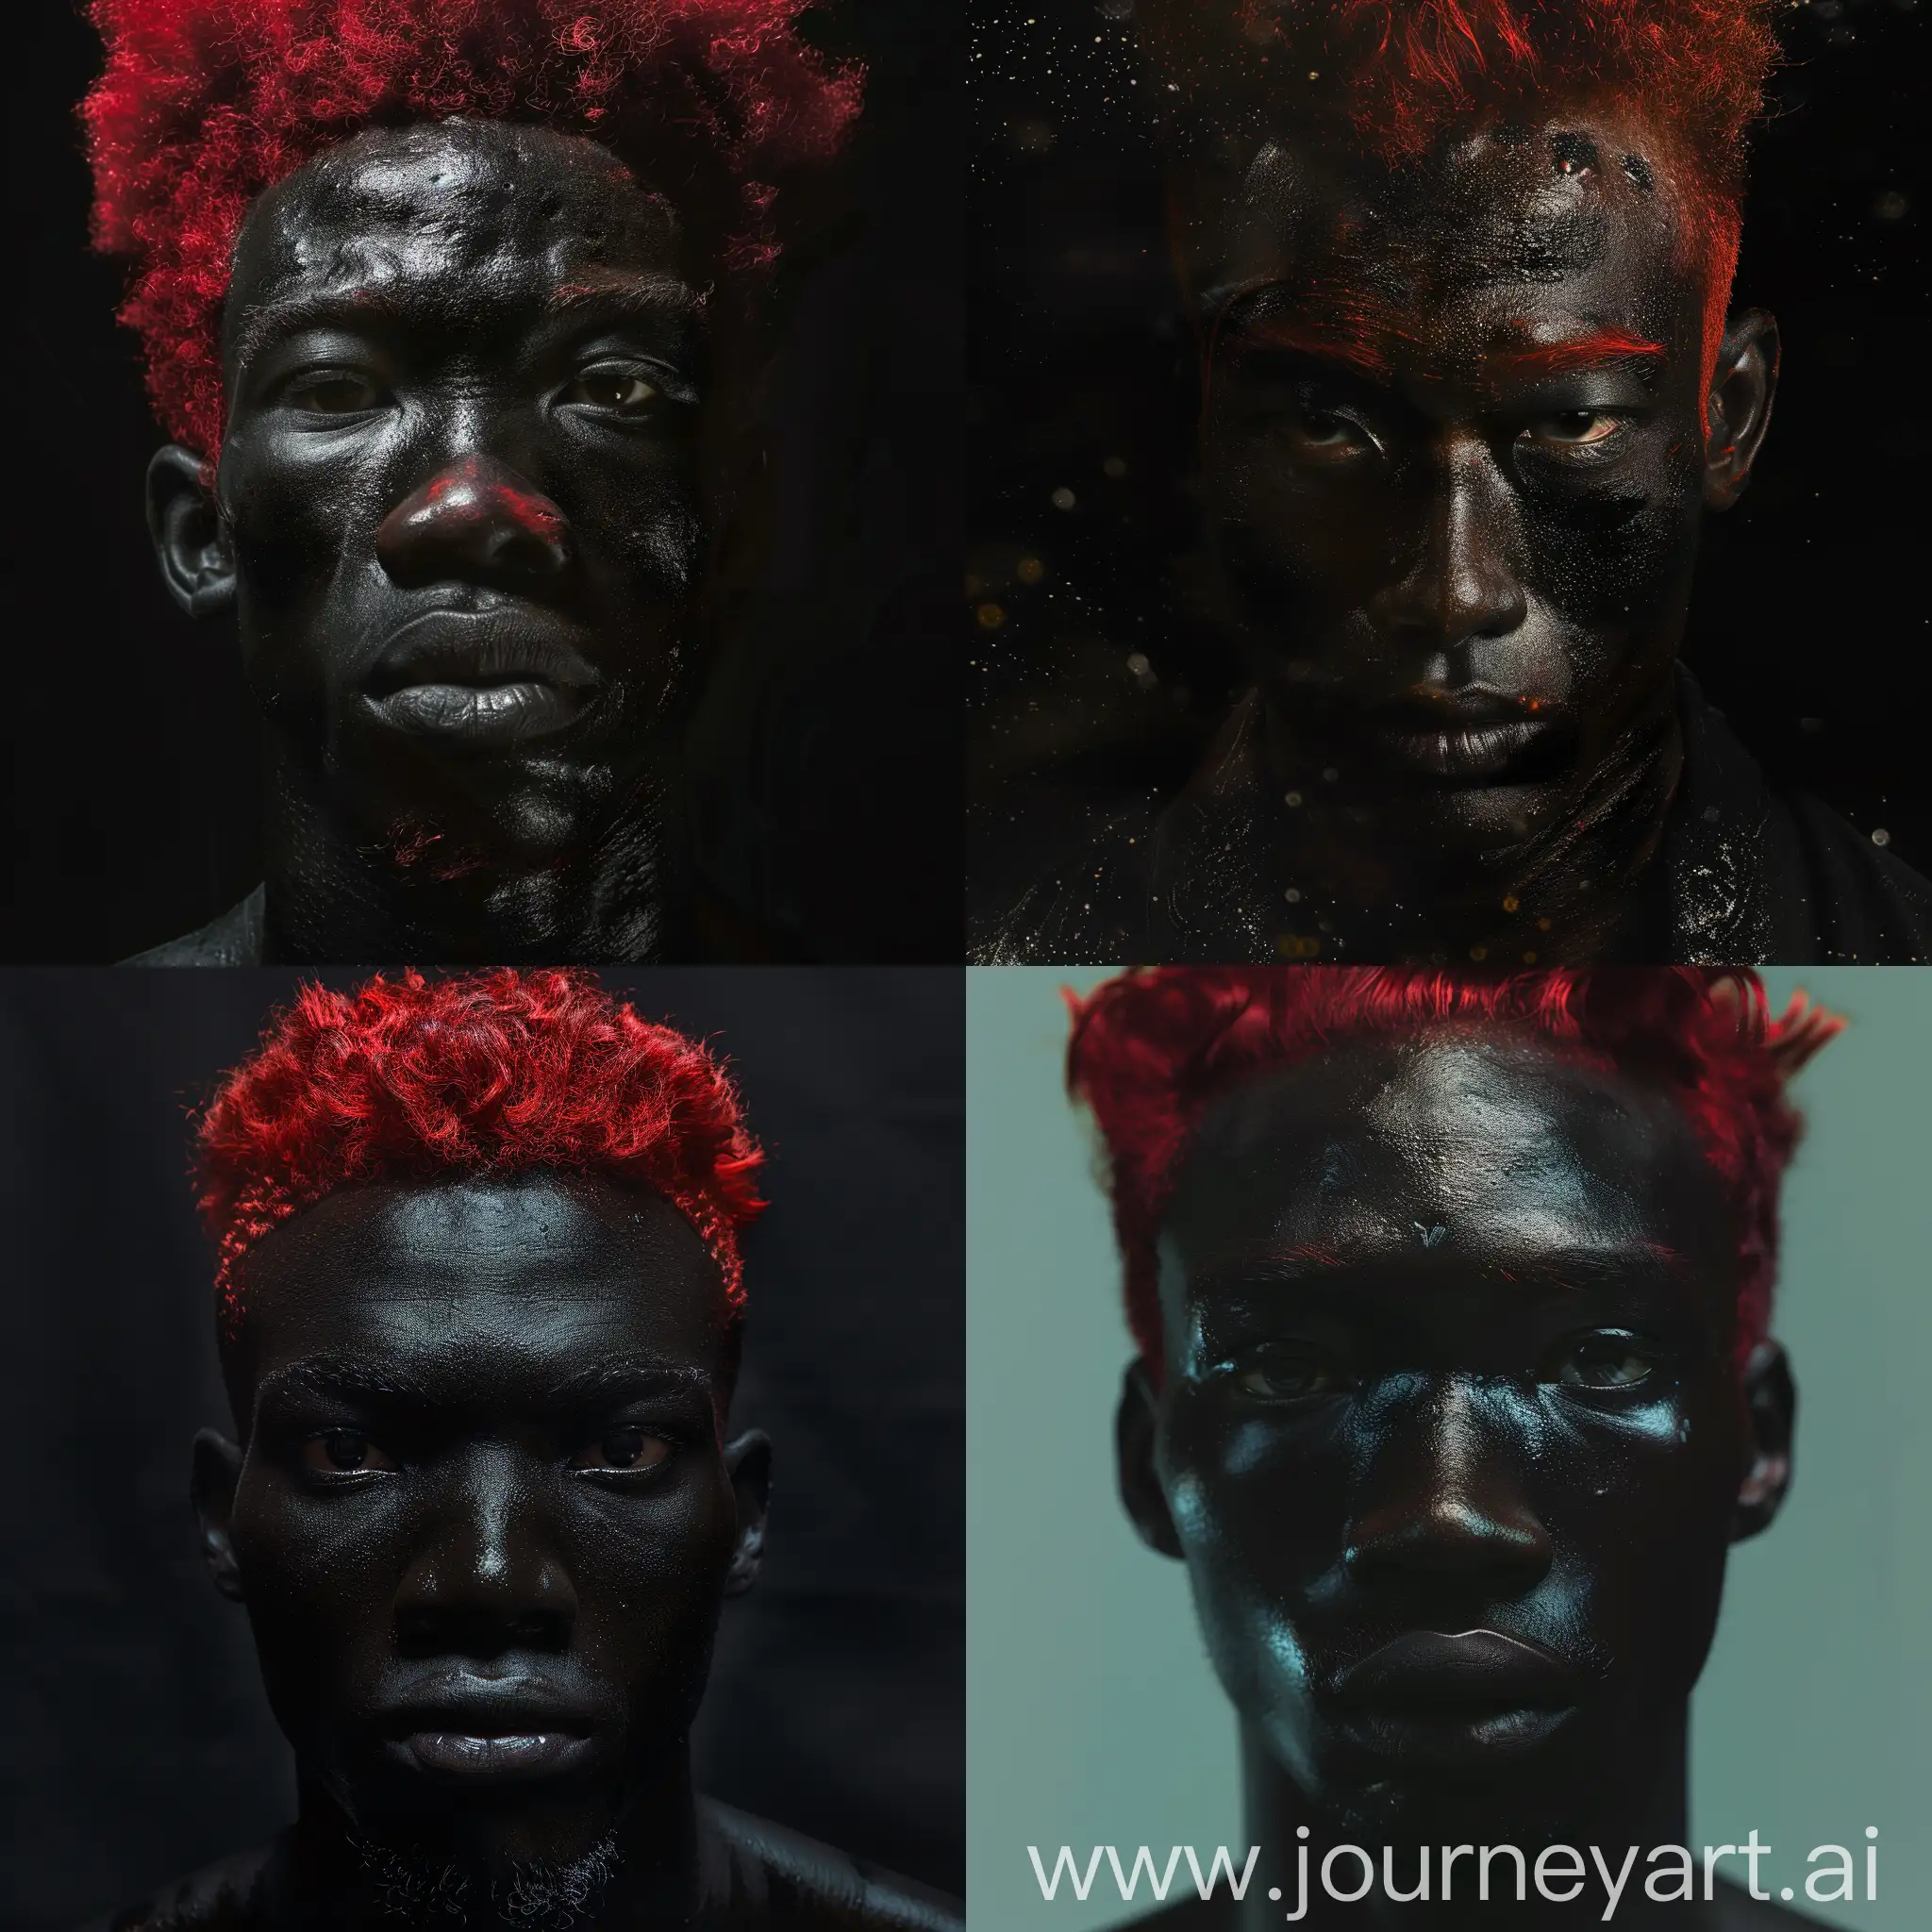 The full screen face of a black man who has red hair and is Chinese